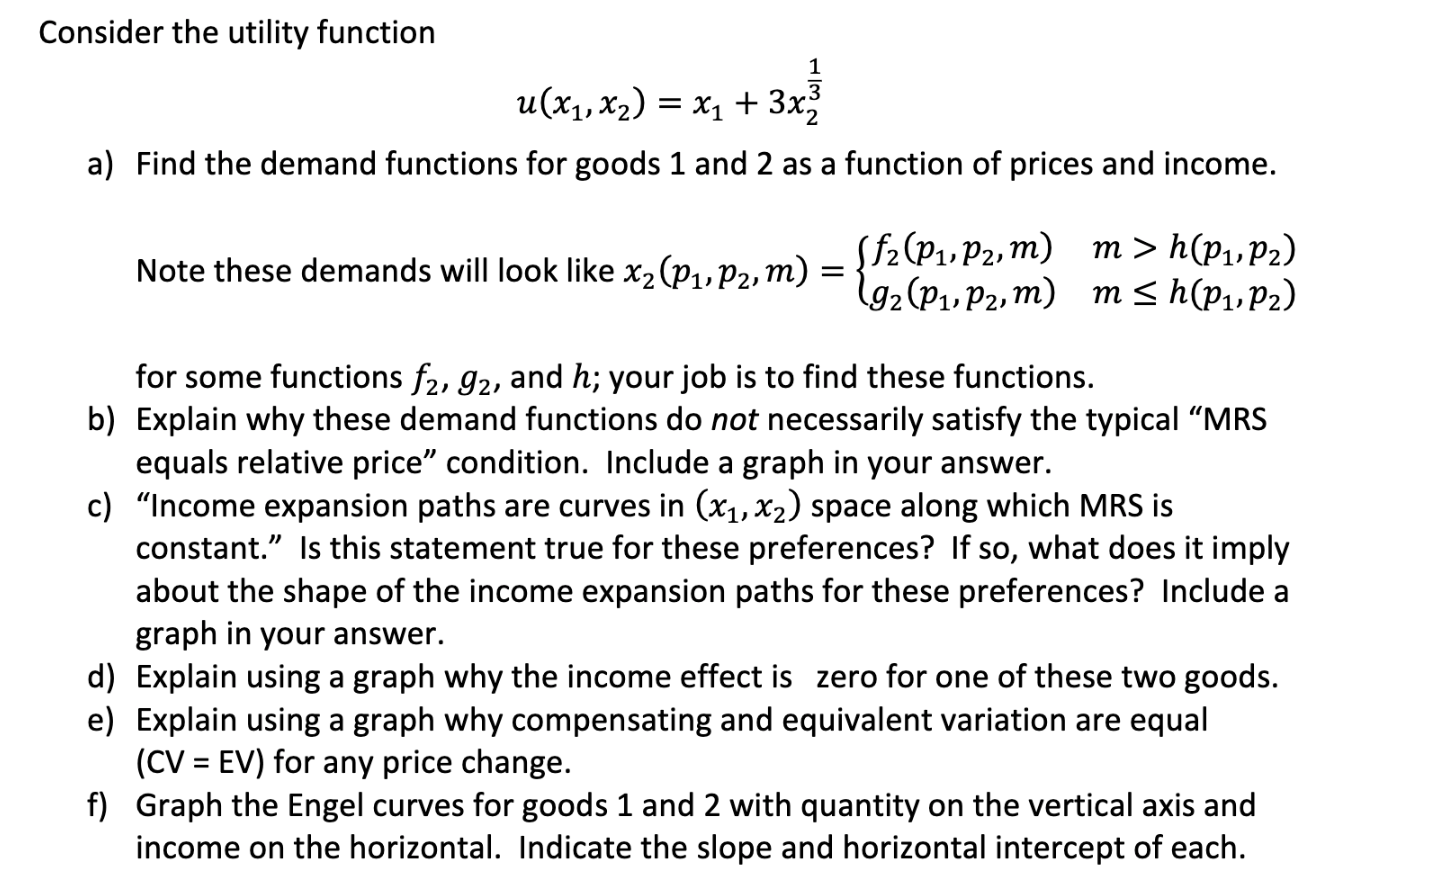 Consider the utility function
и (х, х2) %3D х, + 3x;
a) Find the demand functions for goods 1 and 2 as a function of prices and income.
Note these demands will look like x, (pup2,m) = {72 (P1» P2» m) m > h(Pı, P2)
l92(P1, P2, m) m < h(P,,P2)
for some functions f2, 92, and h; your job is to find these functions.
b) Explain why these demand functions do not necessarily satisfy the typical "MRS
equals relative price" condition. Include a graph in your answer.
c) "Income expansion paths are curves in (x1, x2) space along which MRS is
constant." Is this statement true for these preferences? If so, what does it imply
about the shape of the income expansion paths for these preferences? Include a
graph in your answer.
